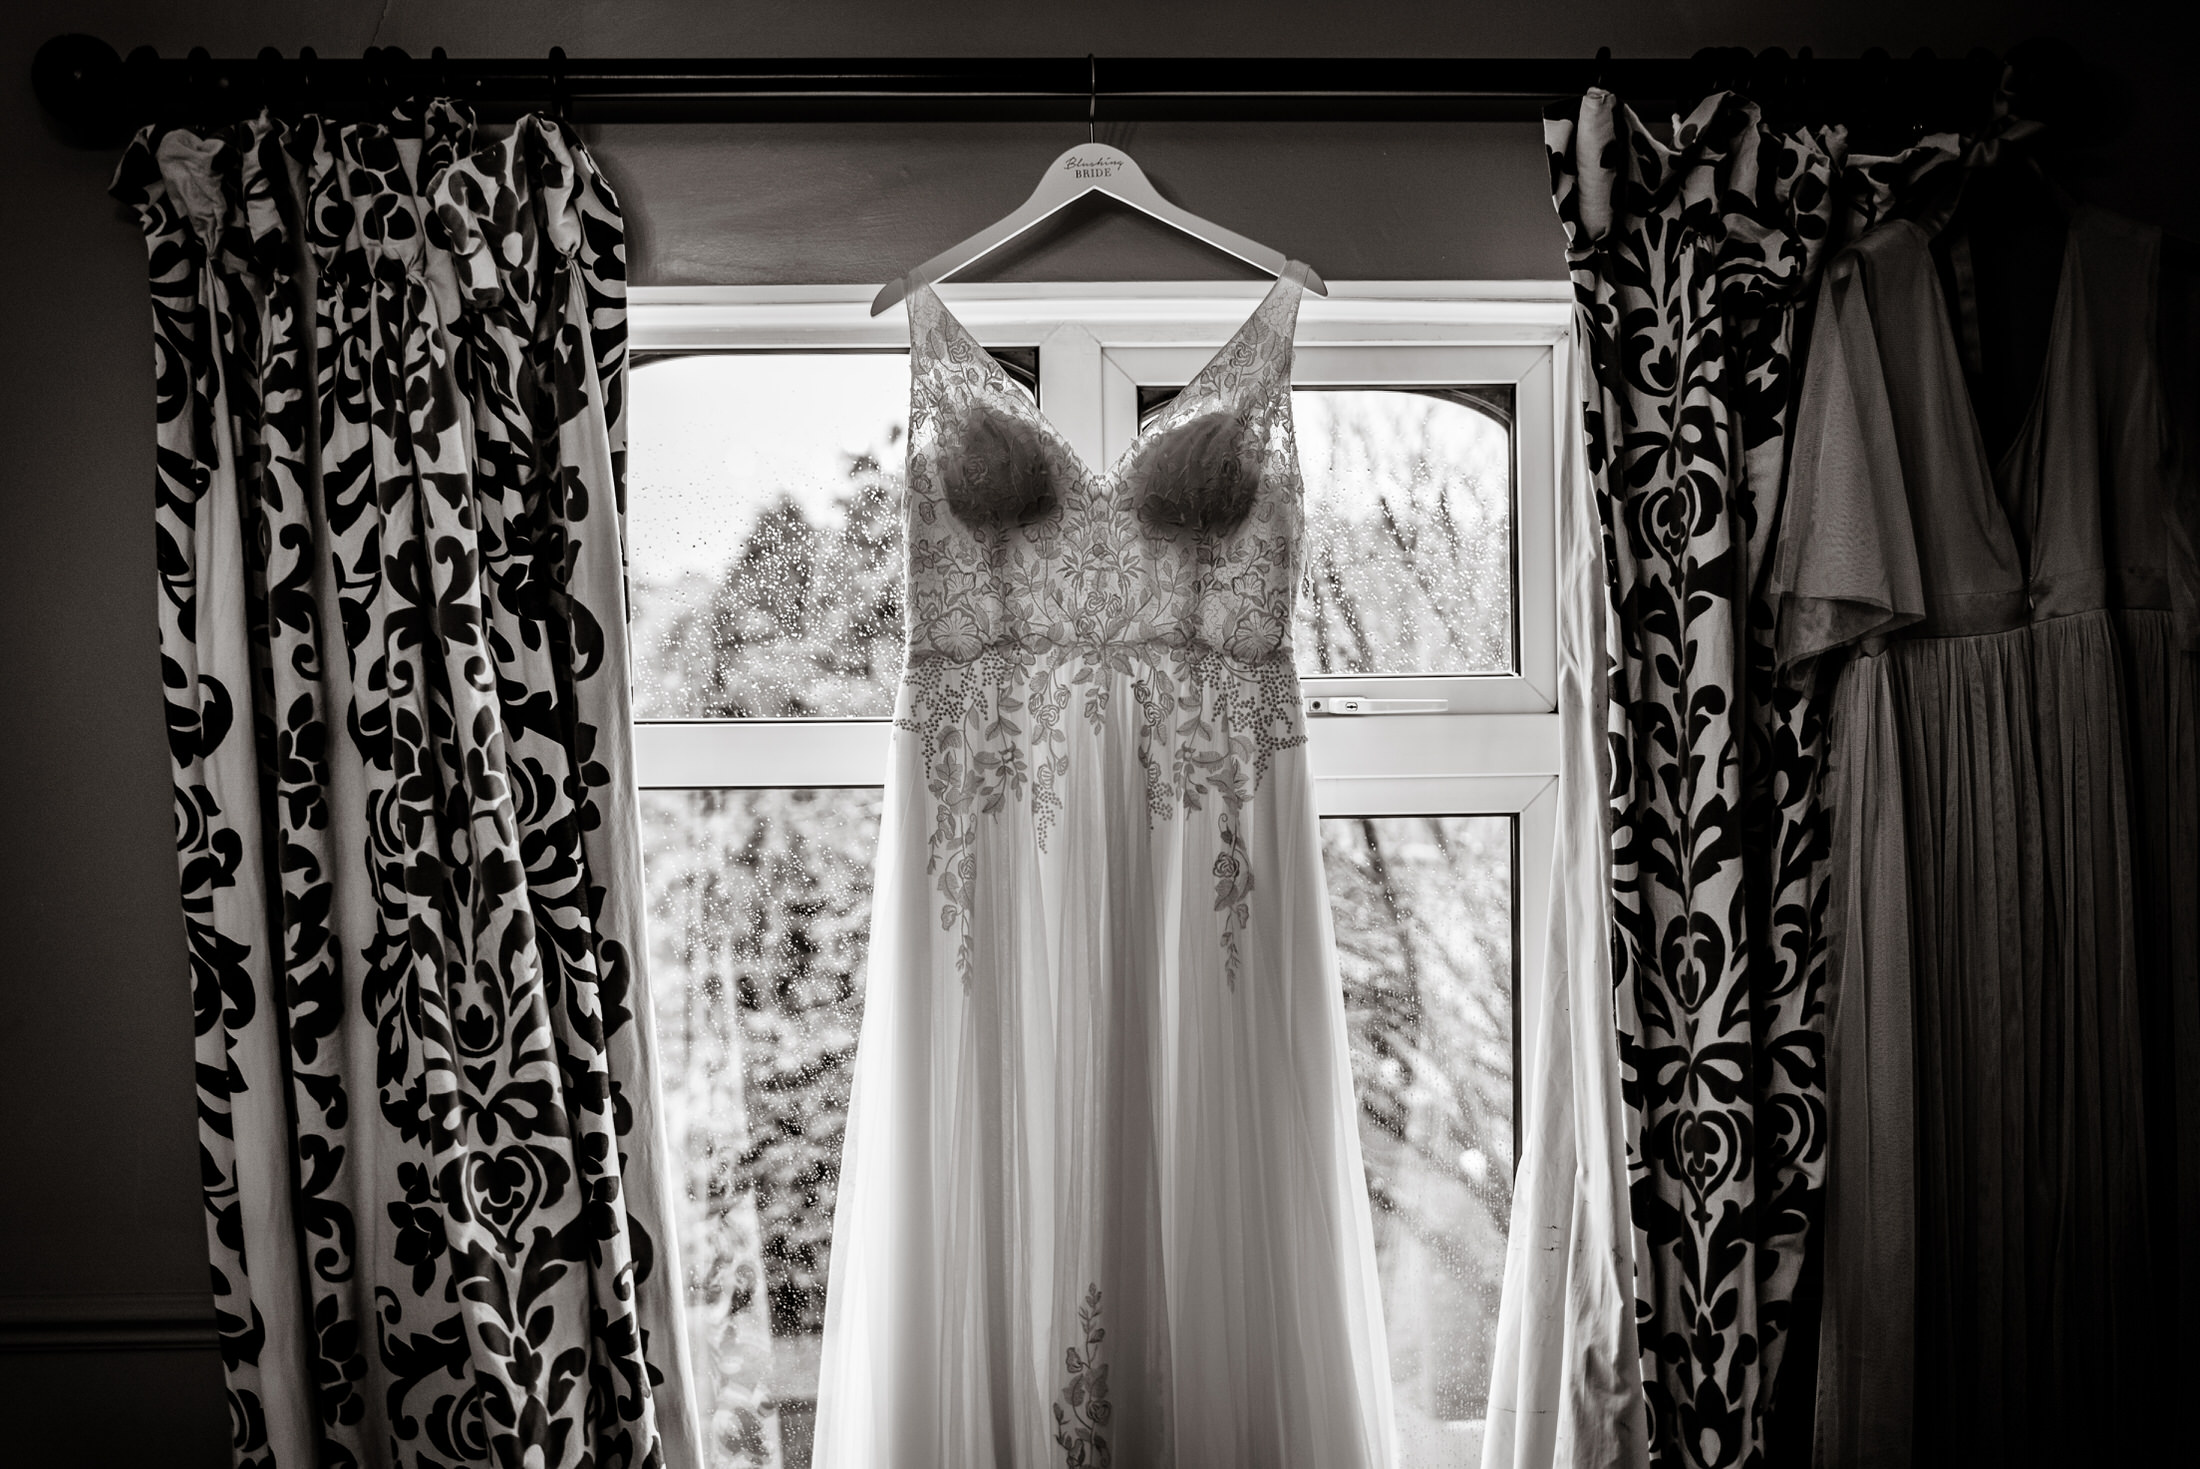 A wedding dress hanging in front of a window at Brackenborough Hotel.